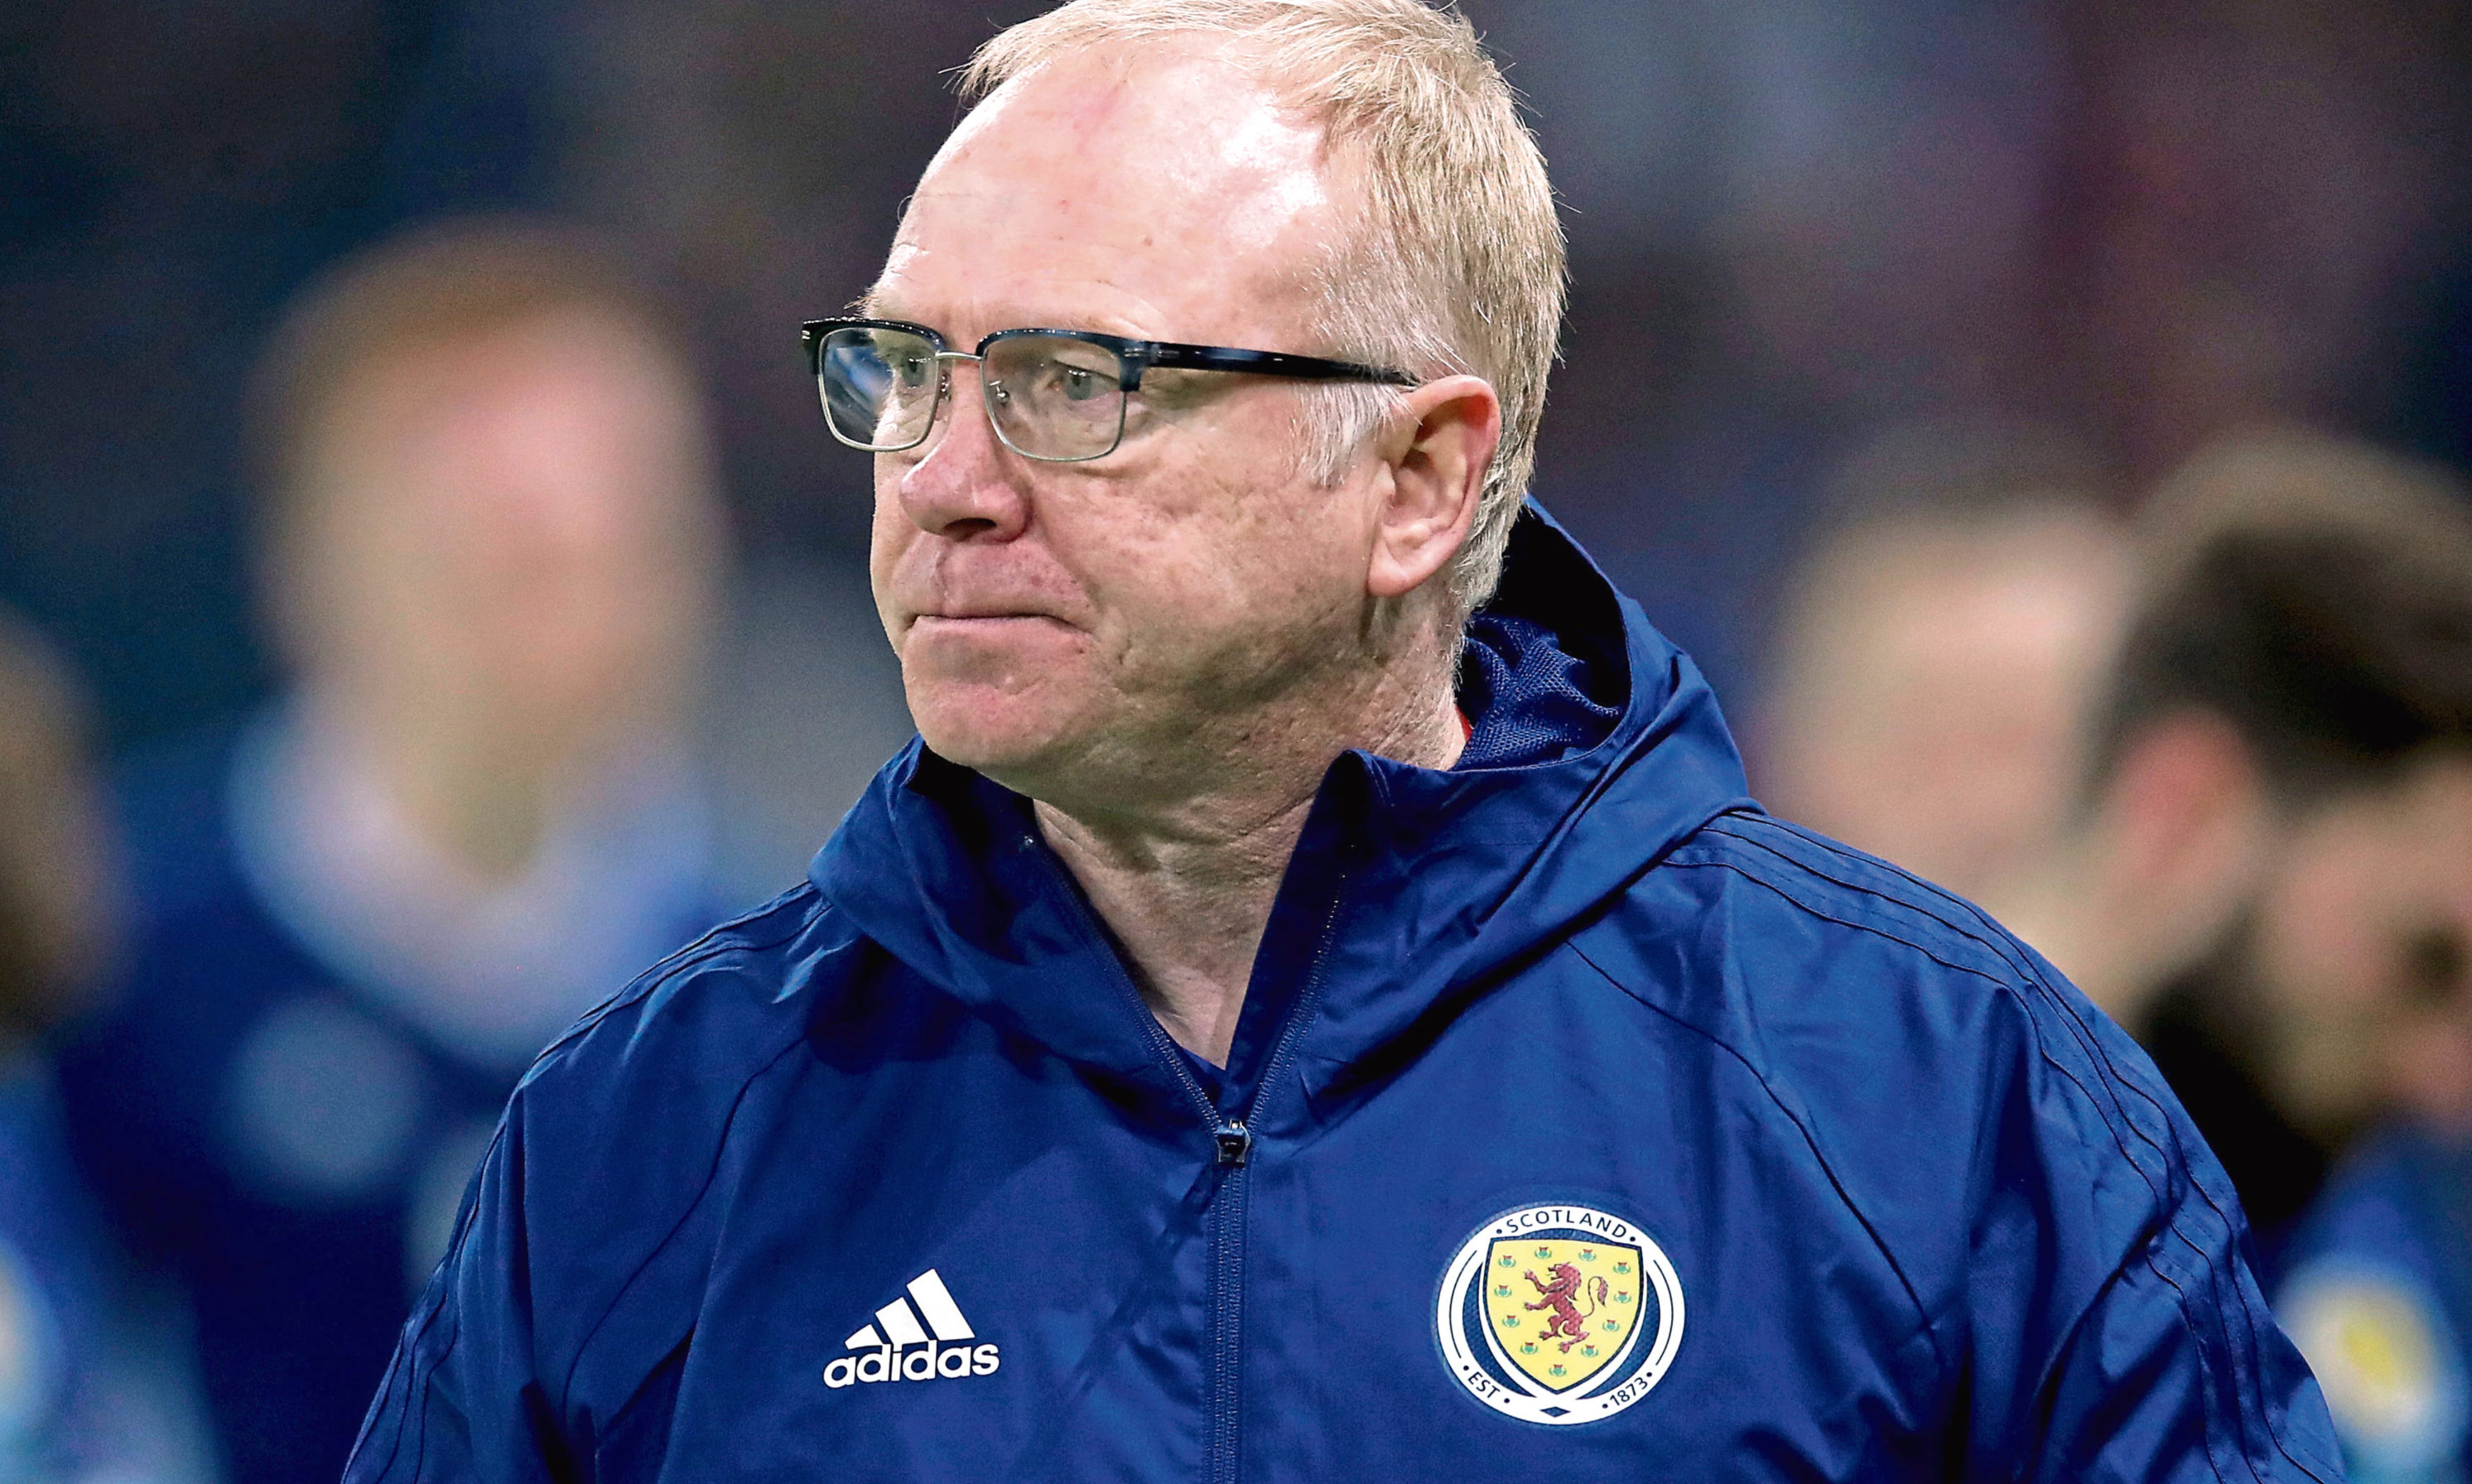 Scotland's manager Alex McLeish after the final whistle during the UEFA Euro 2020 Qualifying, Group I match at the Astana Arena.